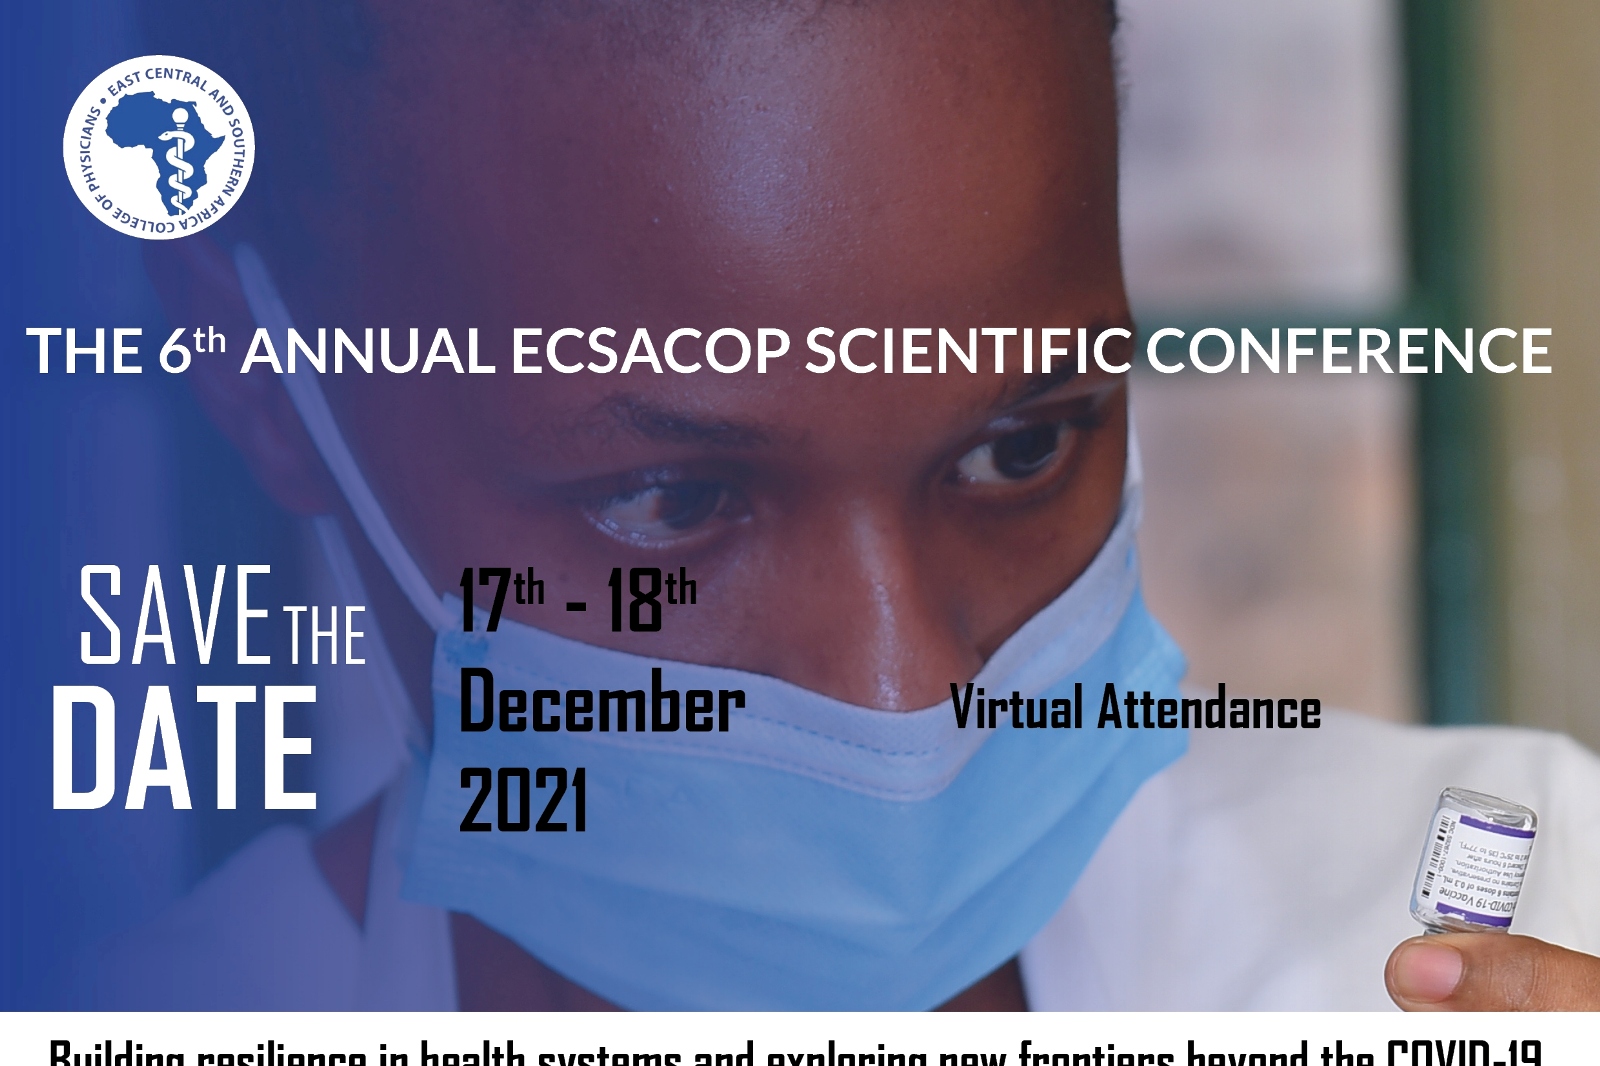 Call for Abstracts: 6th Annual ECSACOP Scientific Conference. Deadline 22nd November 2021.